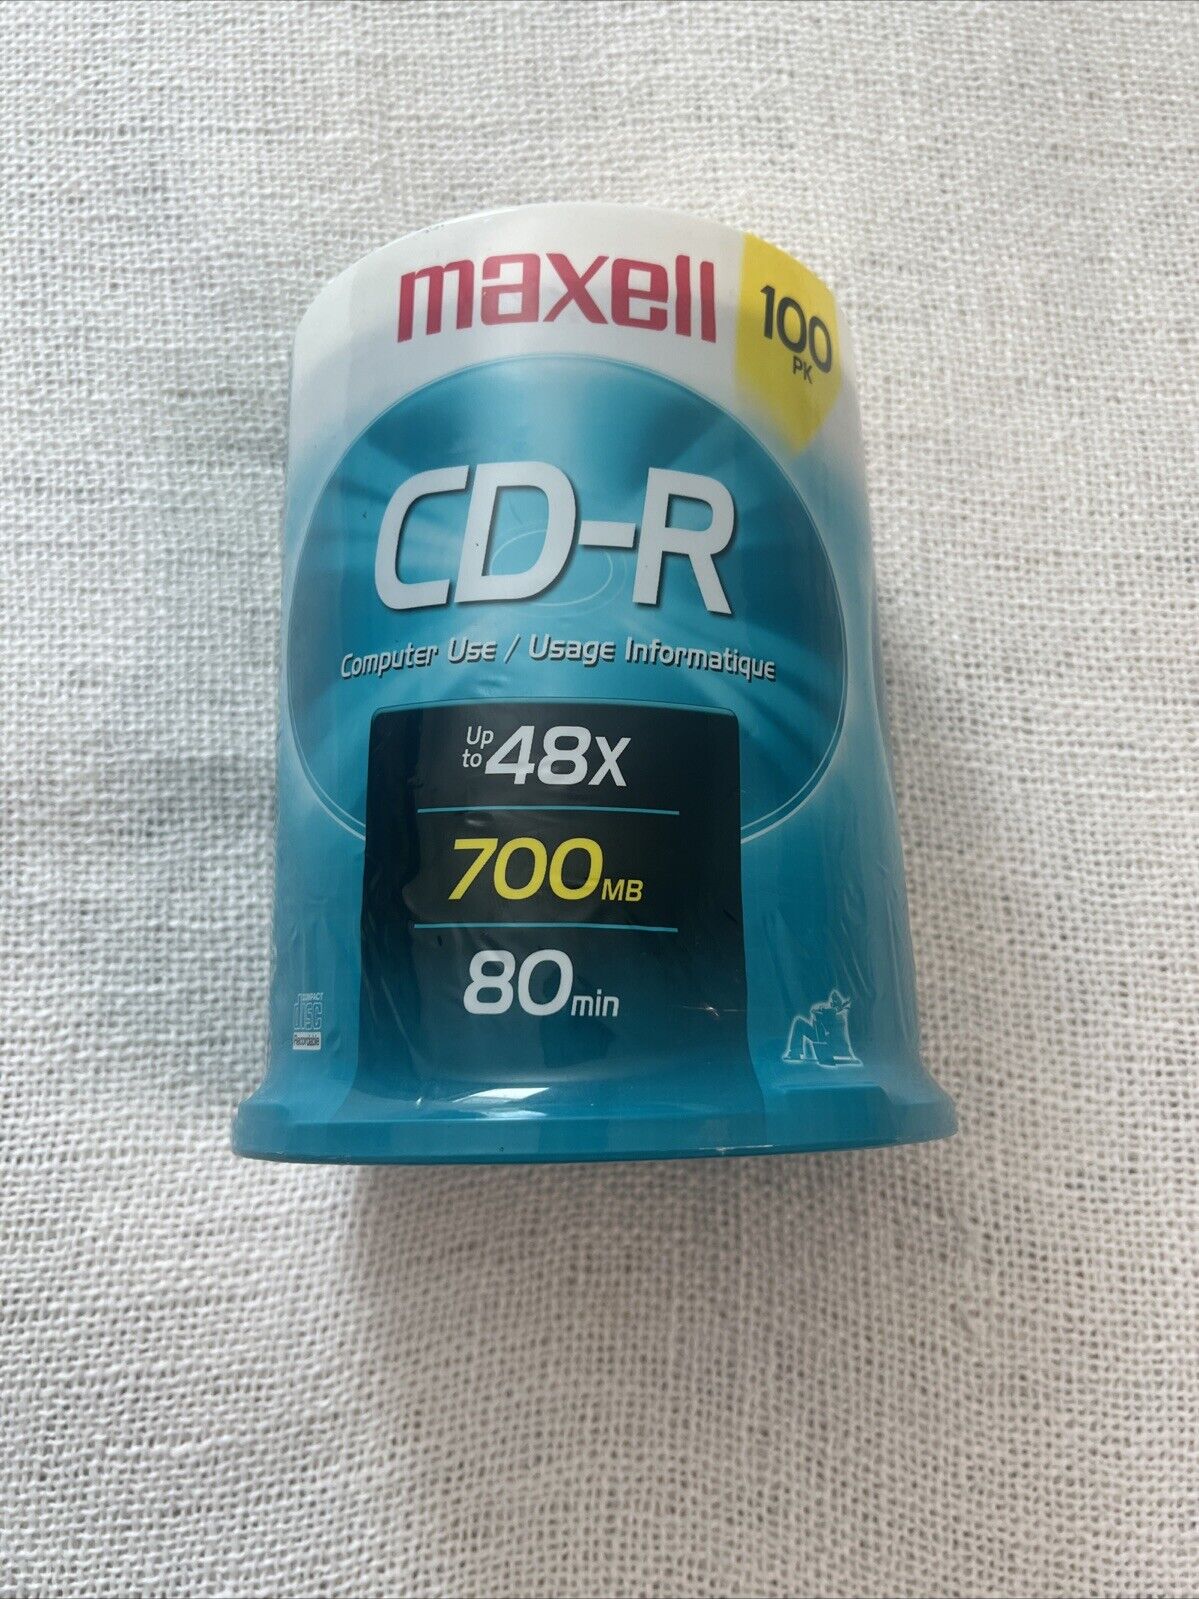 Maxell CD-R Data, 80 Minute, 700 MB, 48x 100 Pack Computer Use